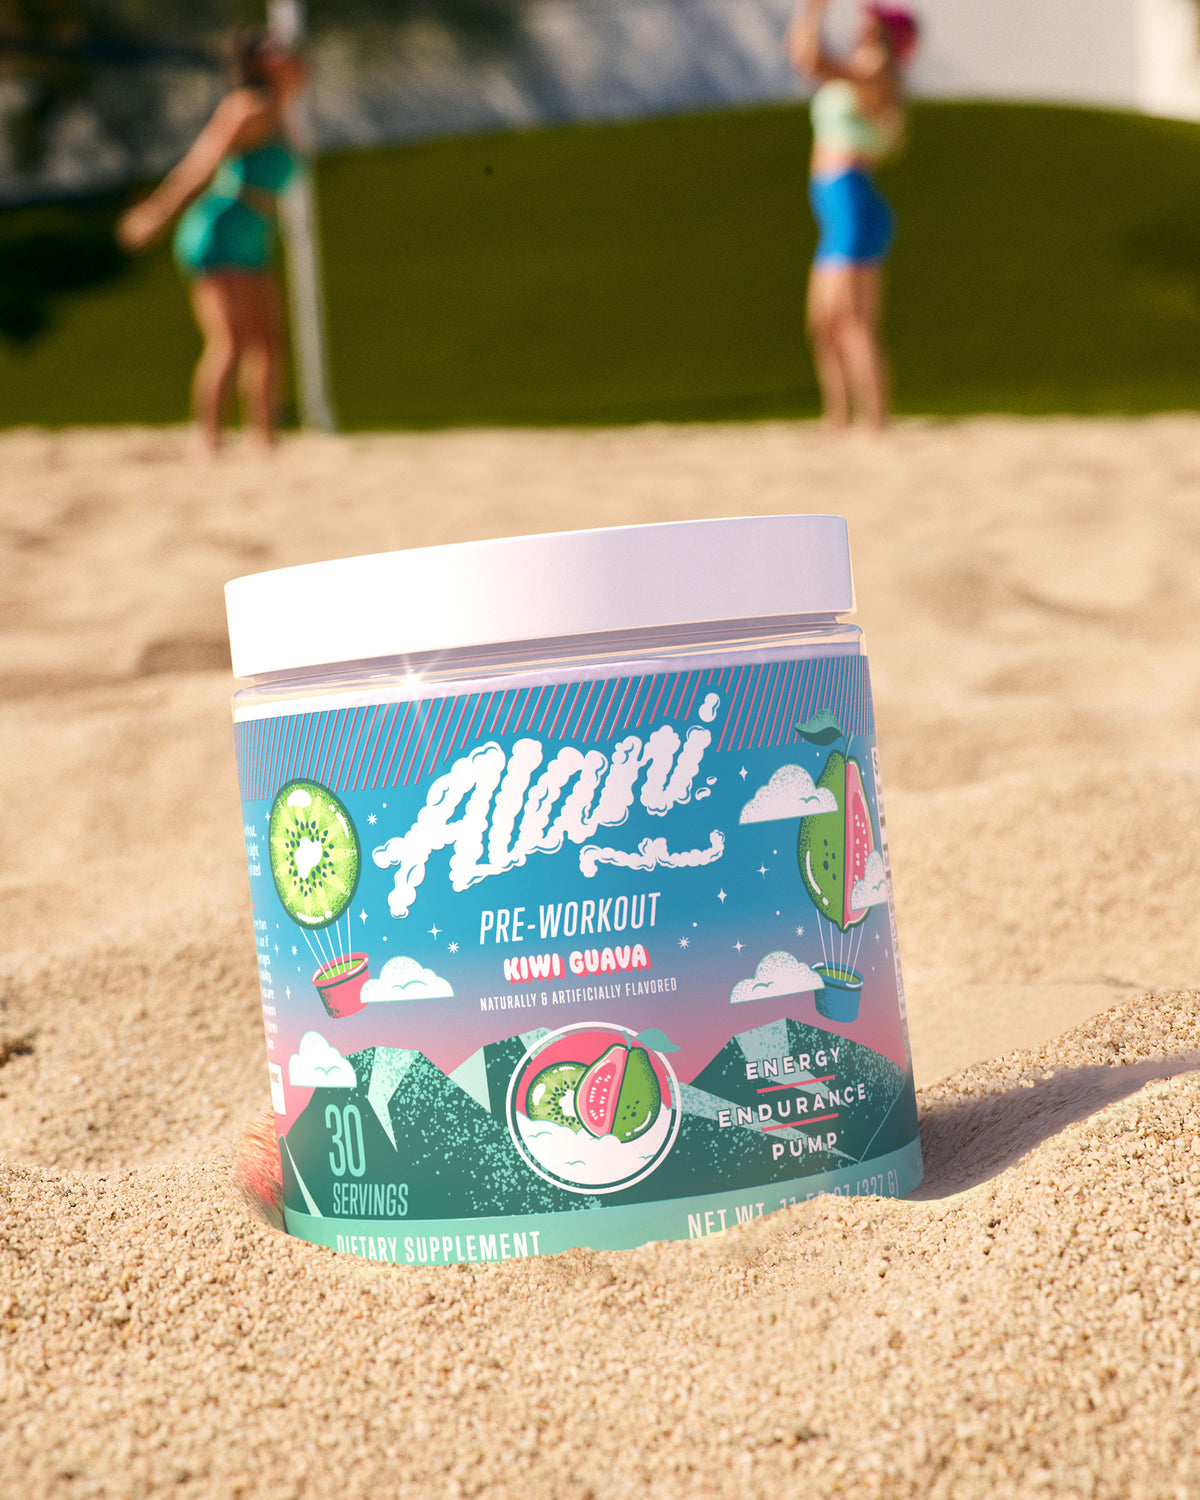 A container of Alani Nu Pre-Workout - Kiwi Guava sits in the sand on a beach.